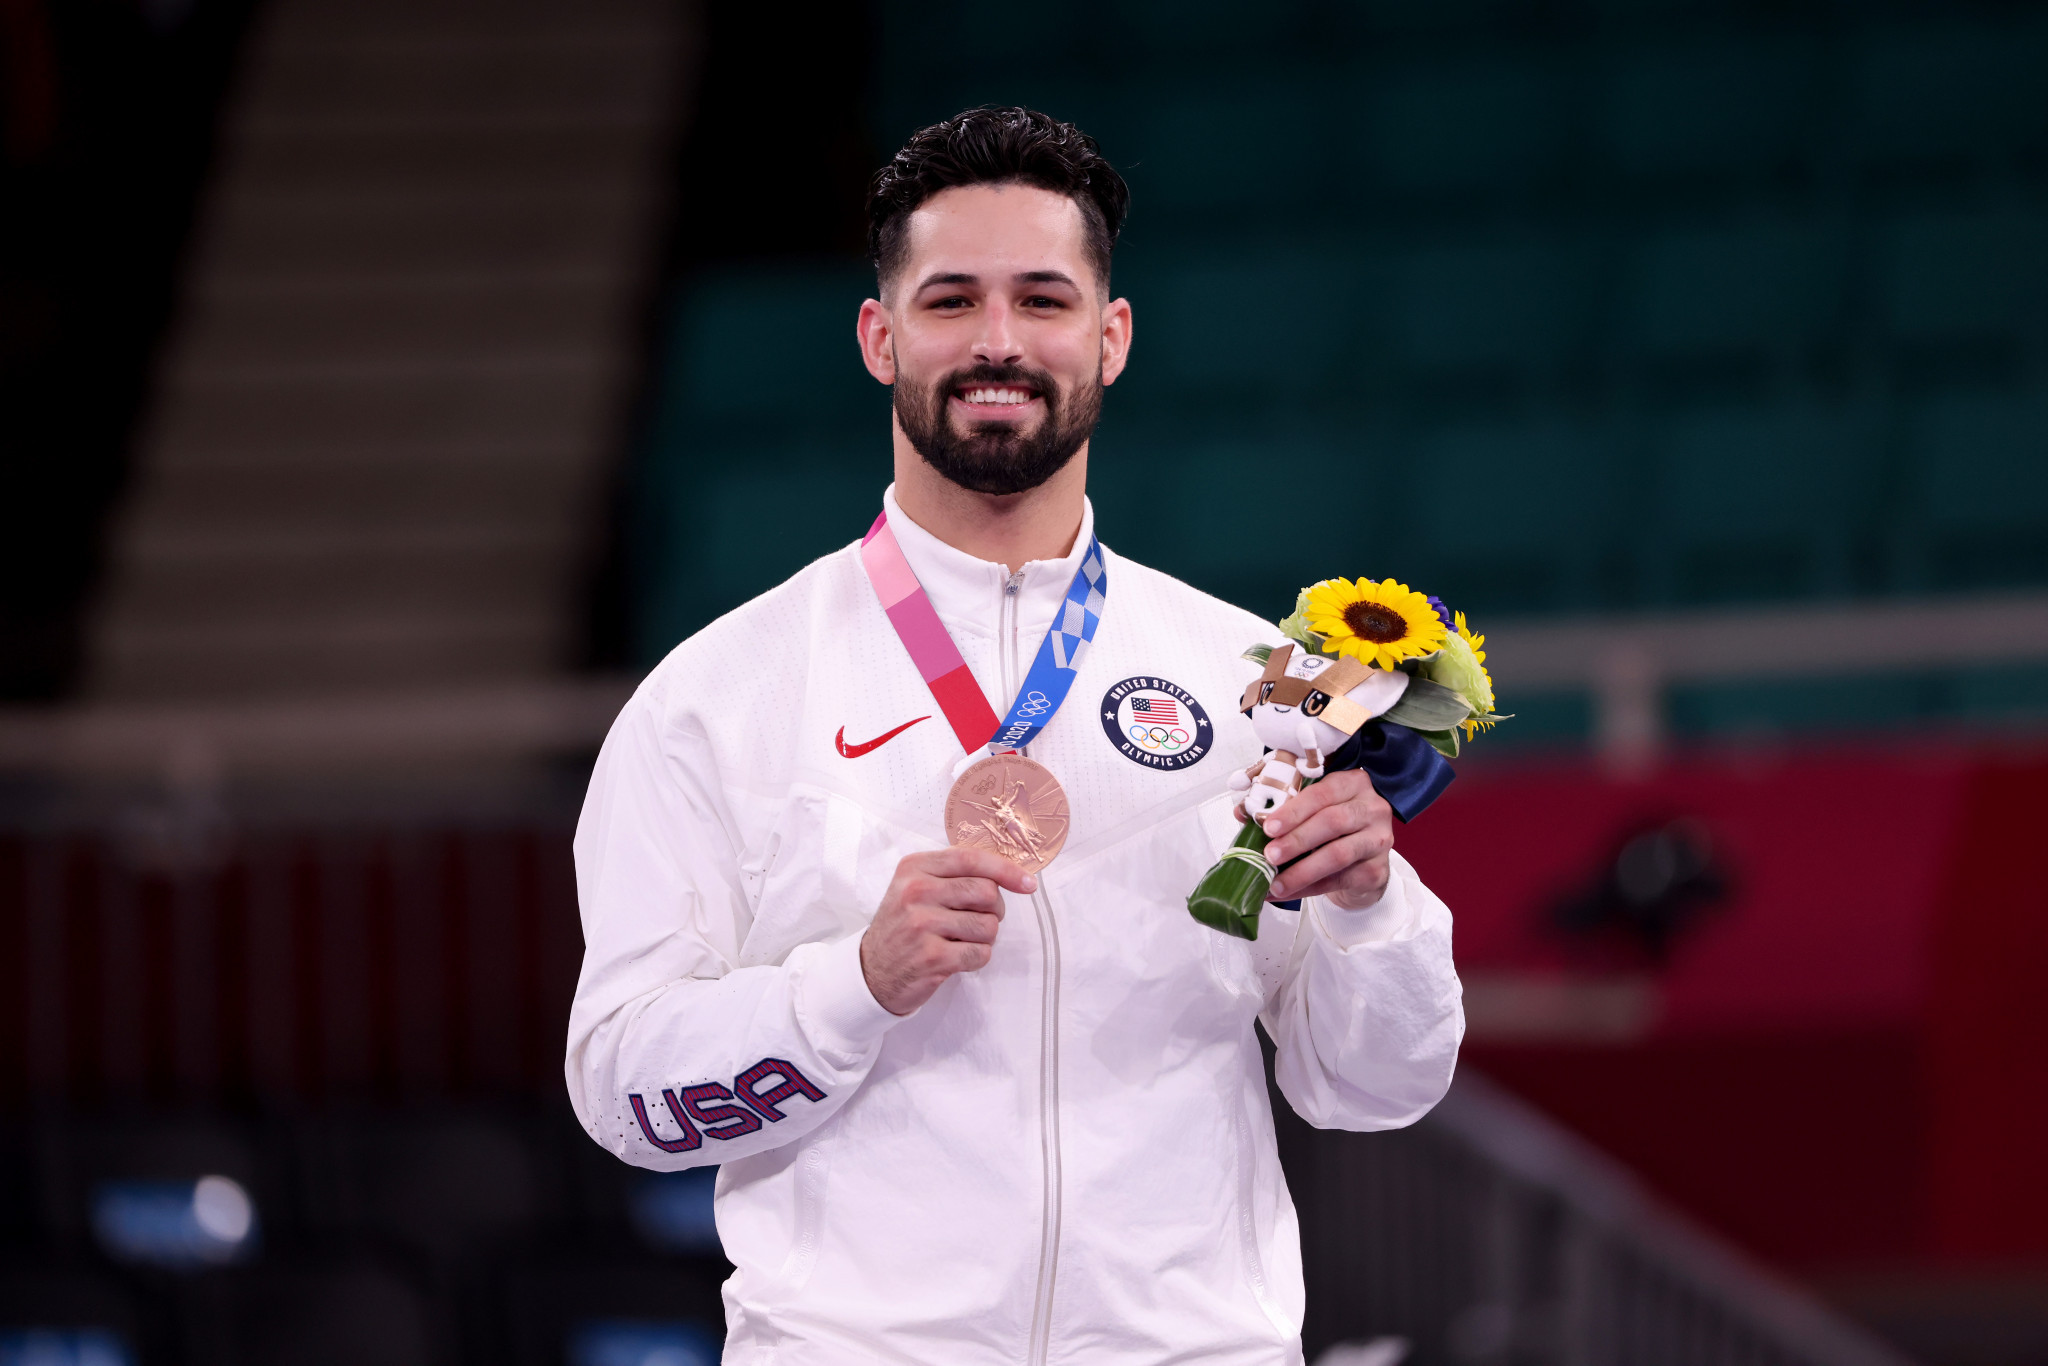 Ariel Torres won a karate bronze medal for the United States at Tokyo 2020 in the men's kata event ©Getty Images